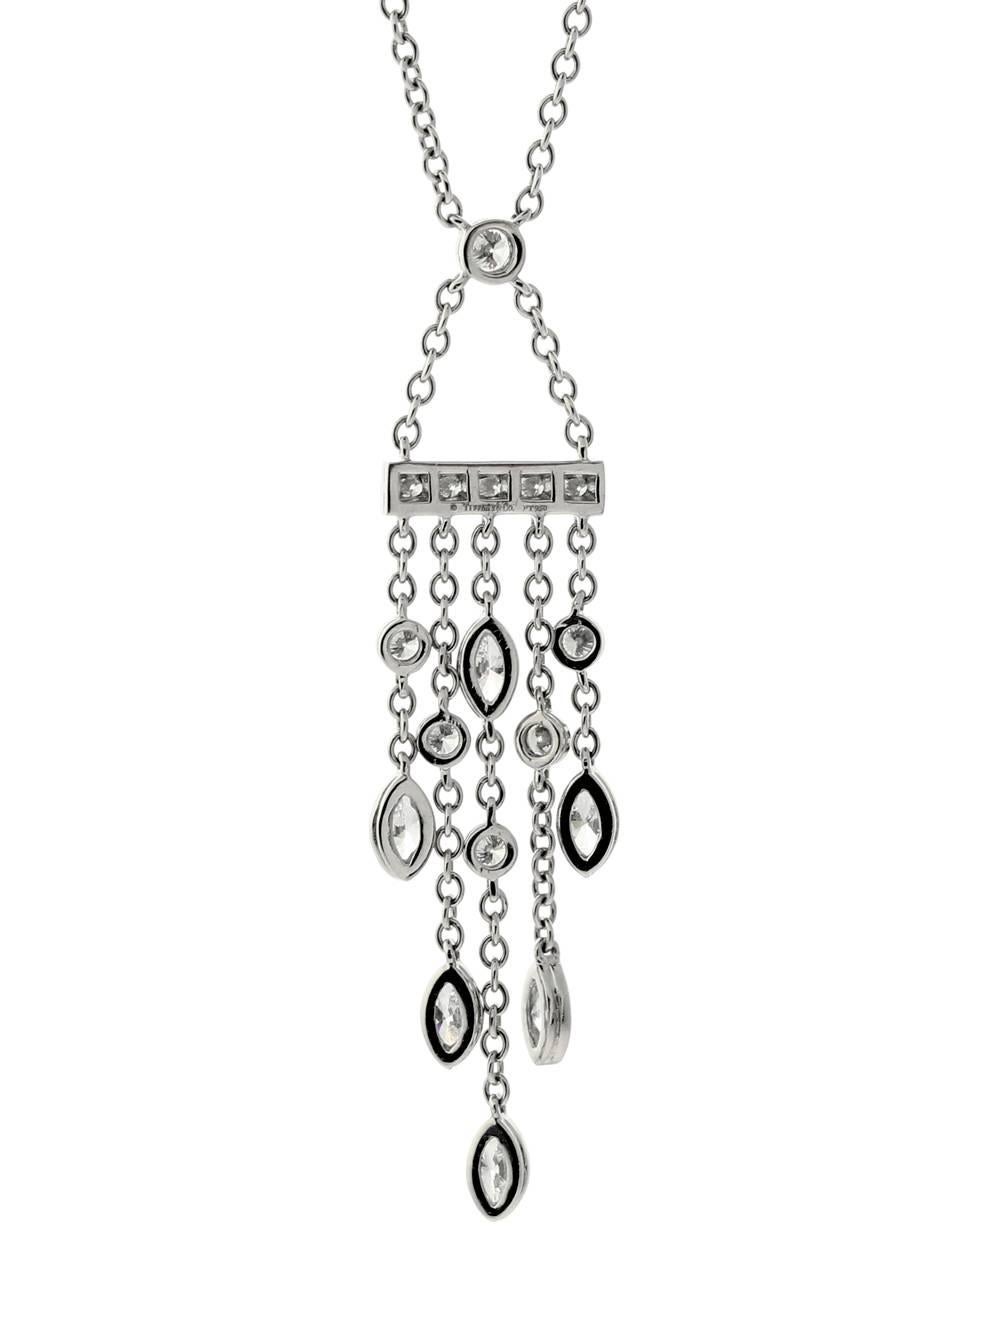 A luxurious Tiffany & Co. necklace featuring round brilliant cut diamonds mixed with marquise diamonds set in platinum. 

This drop of the pendant measures 2